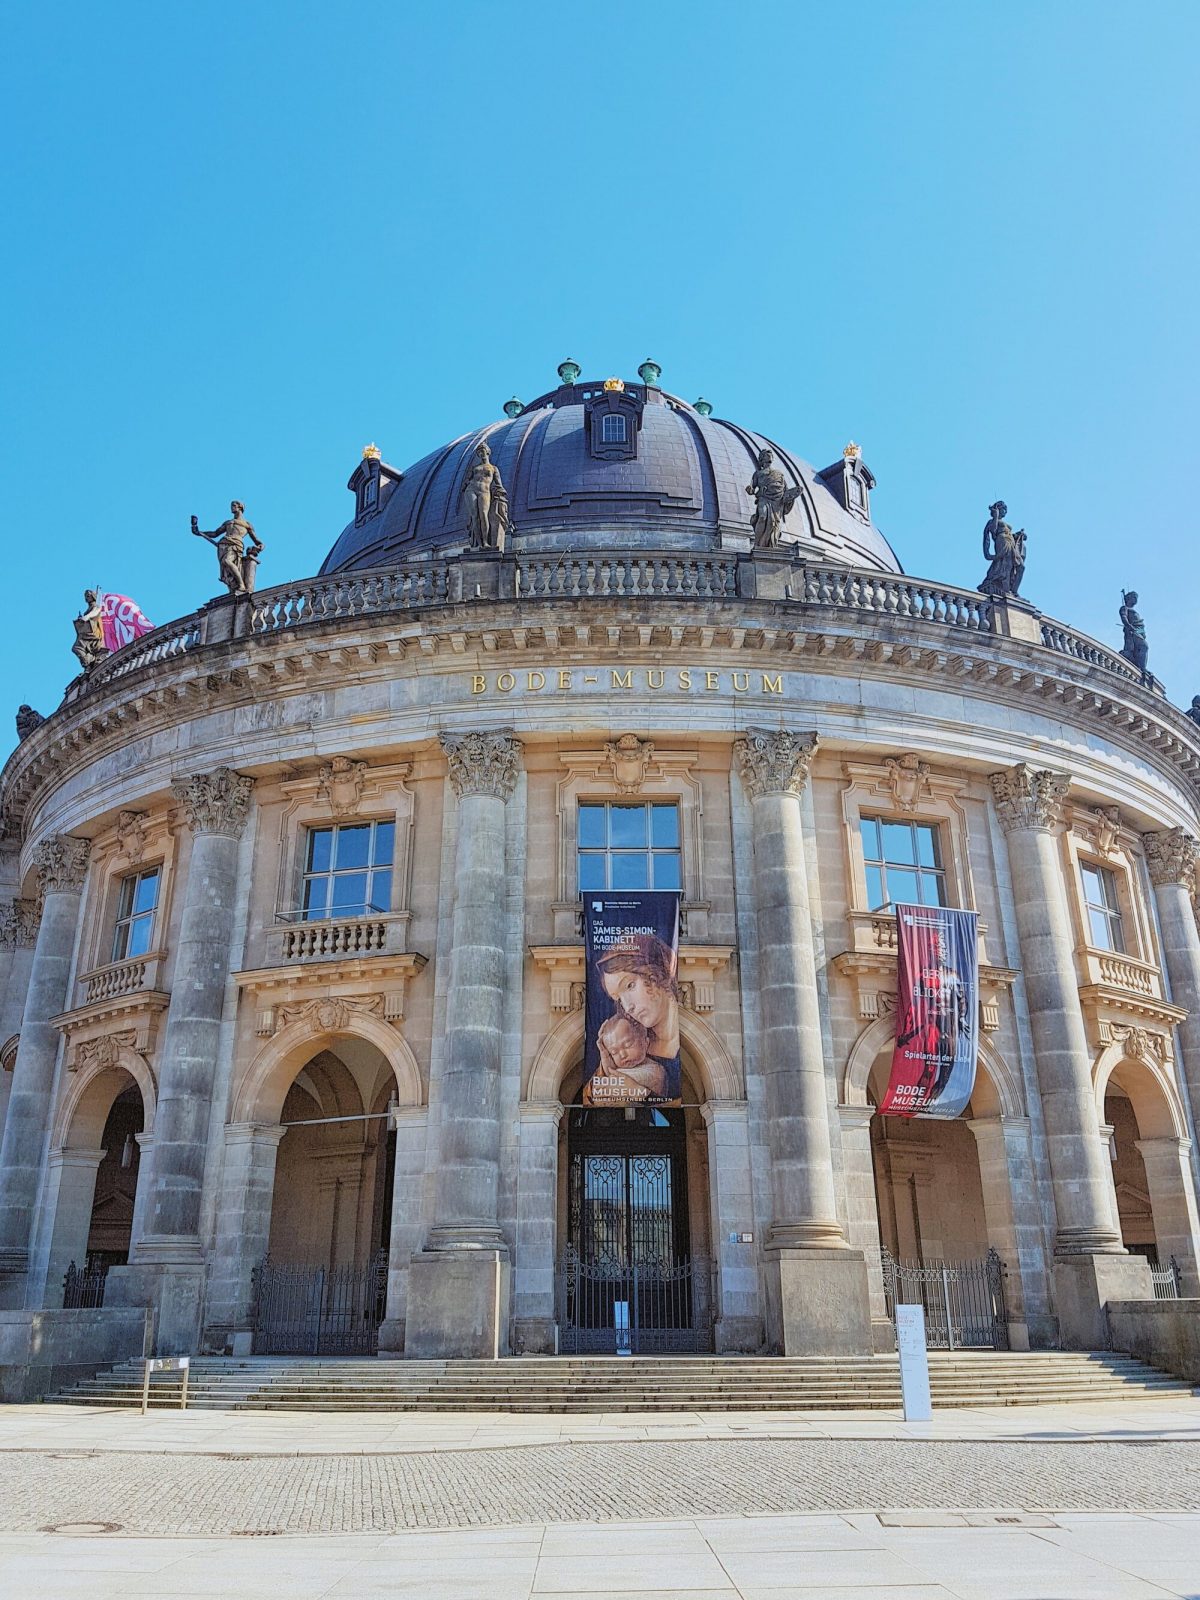 Rediscovering Your City: A World of Art in Berlin